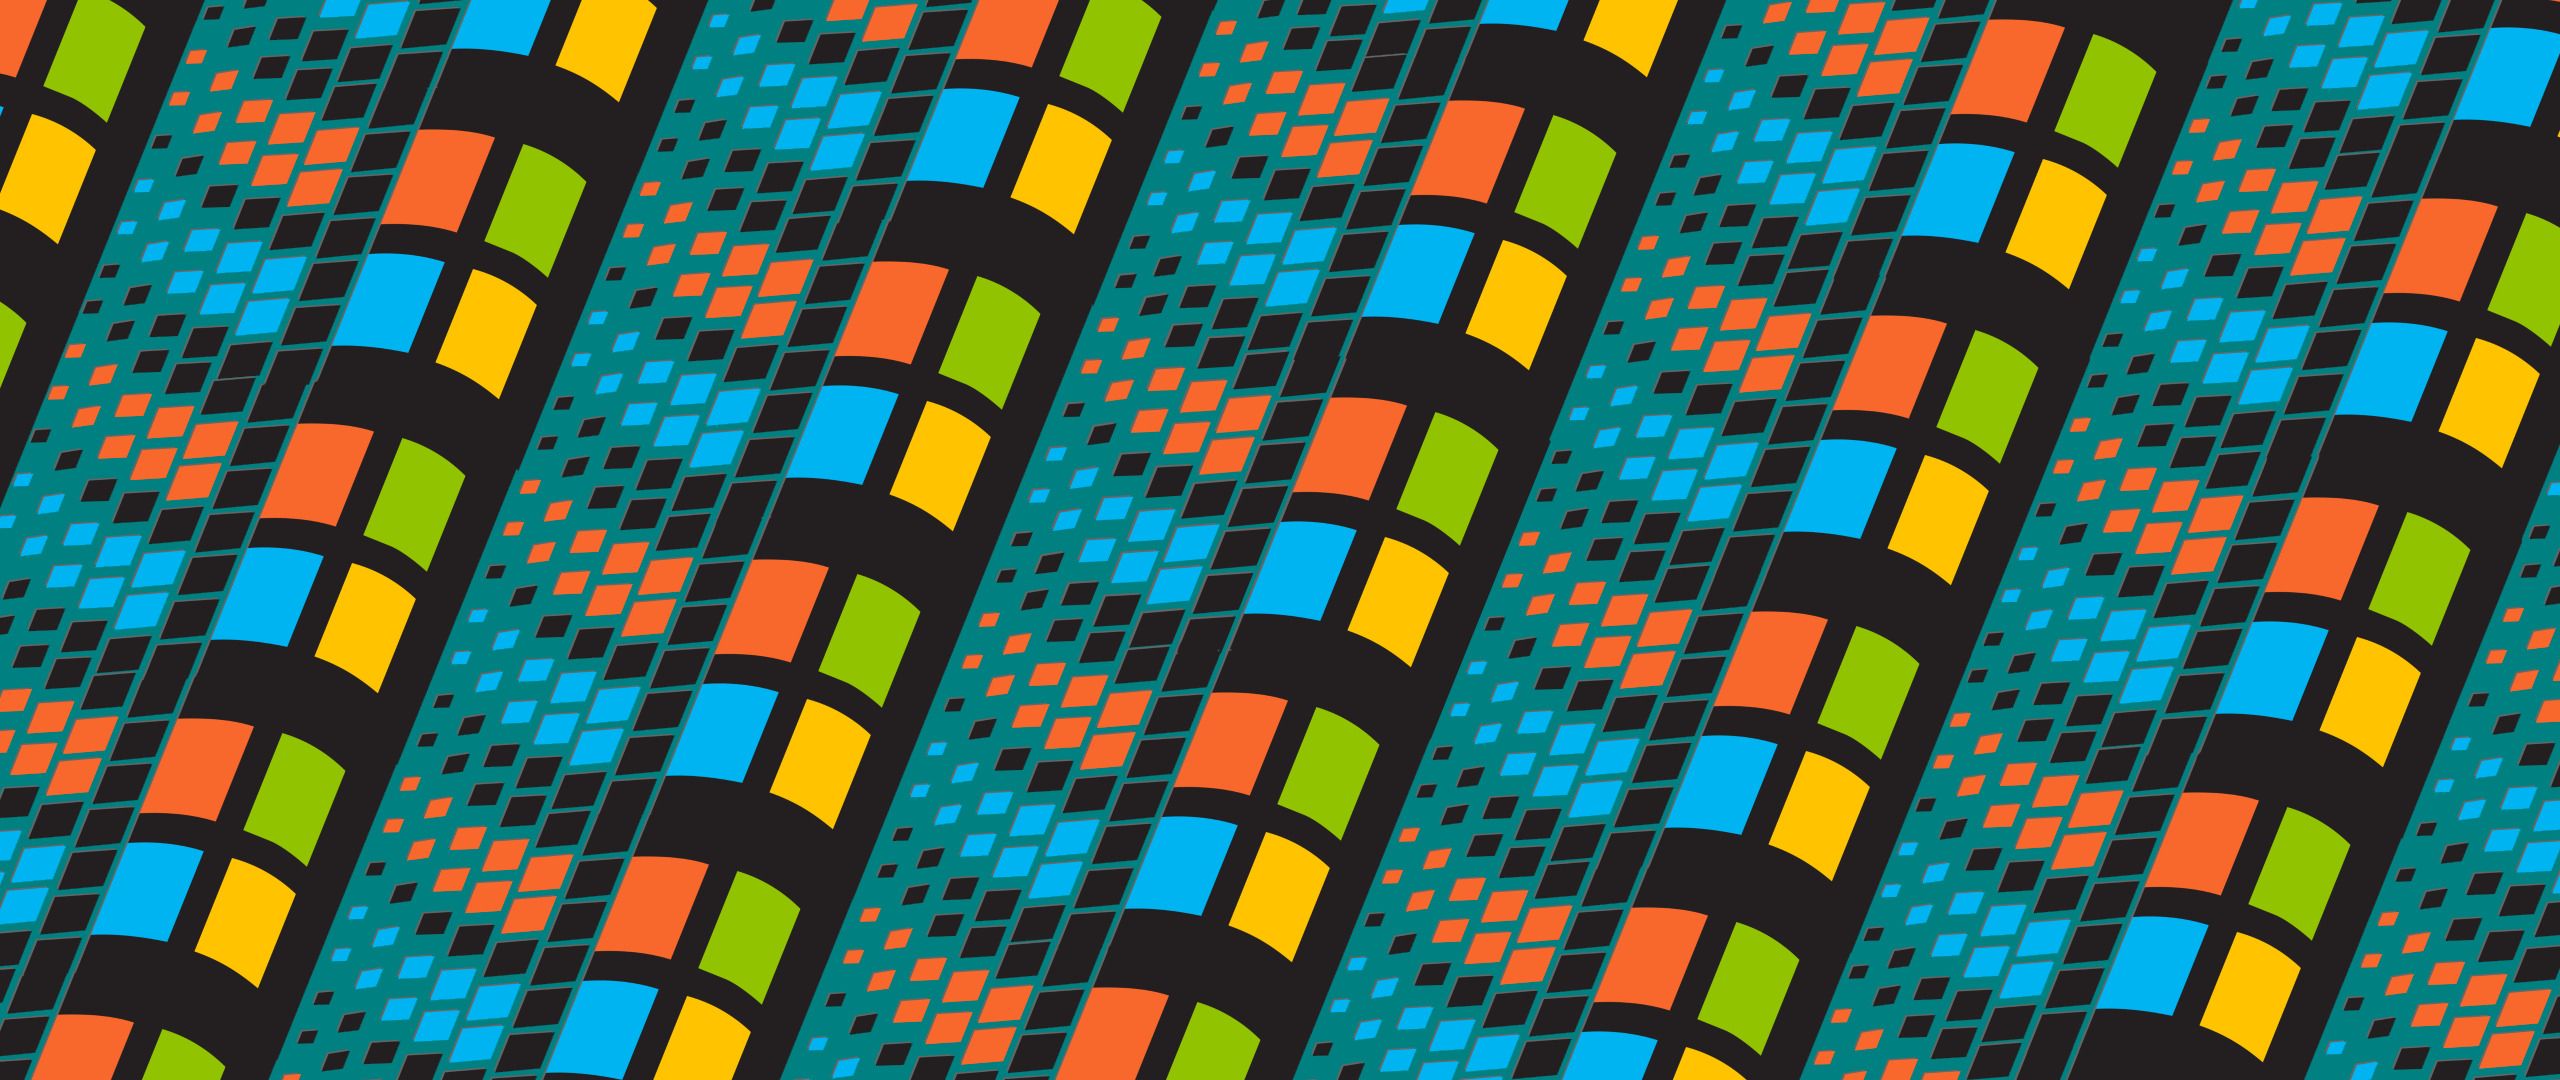 An abstract pattern of colorful squares on a black background - Windows 95